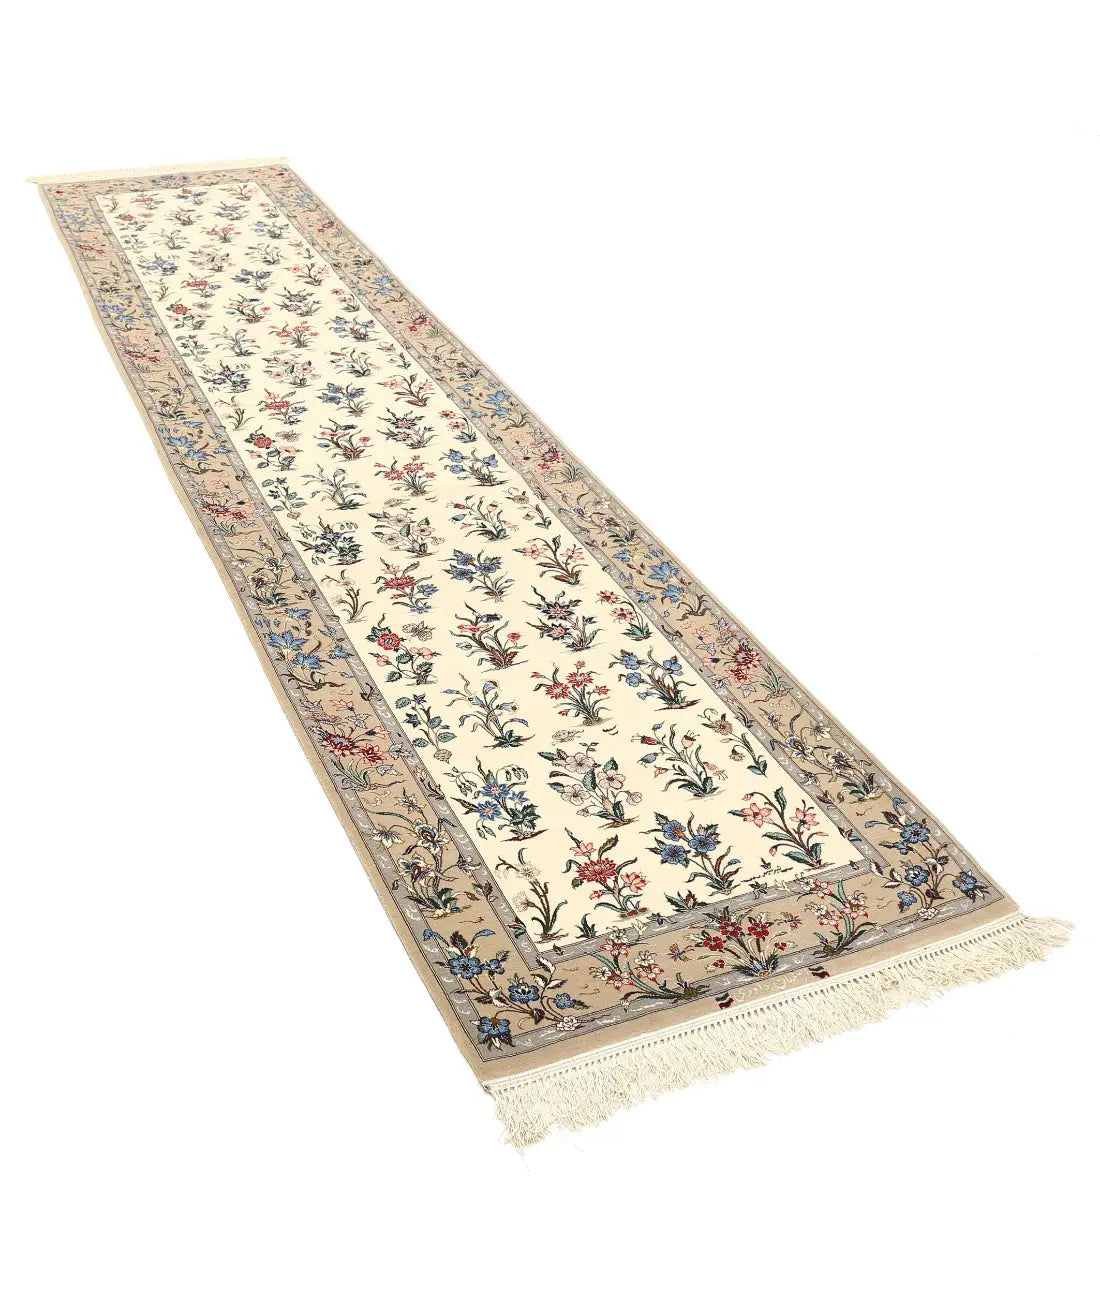 Hand Knotted Antique Masterpiece Persian Isfahan Wool & Silk Rug - 2'9'' x 11'7'' - Arteverk Rugs Area rug